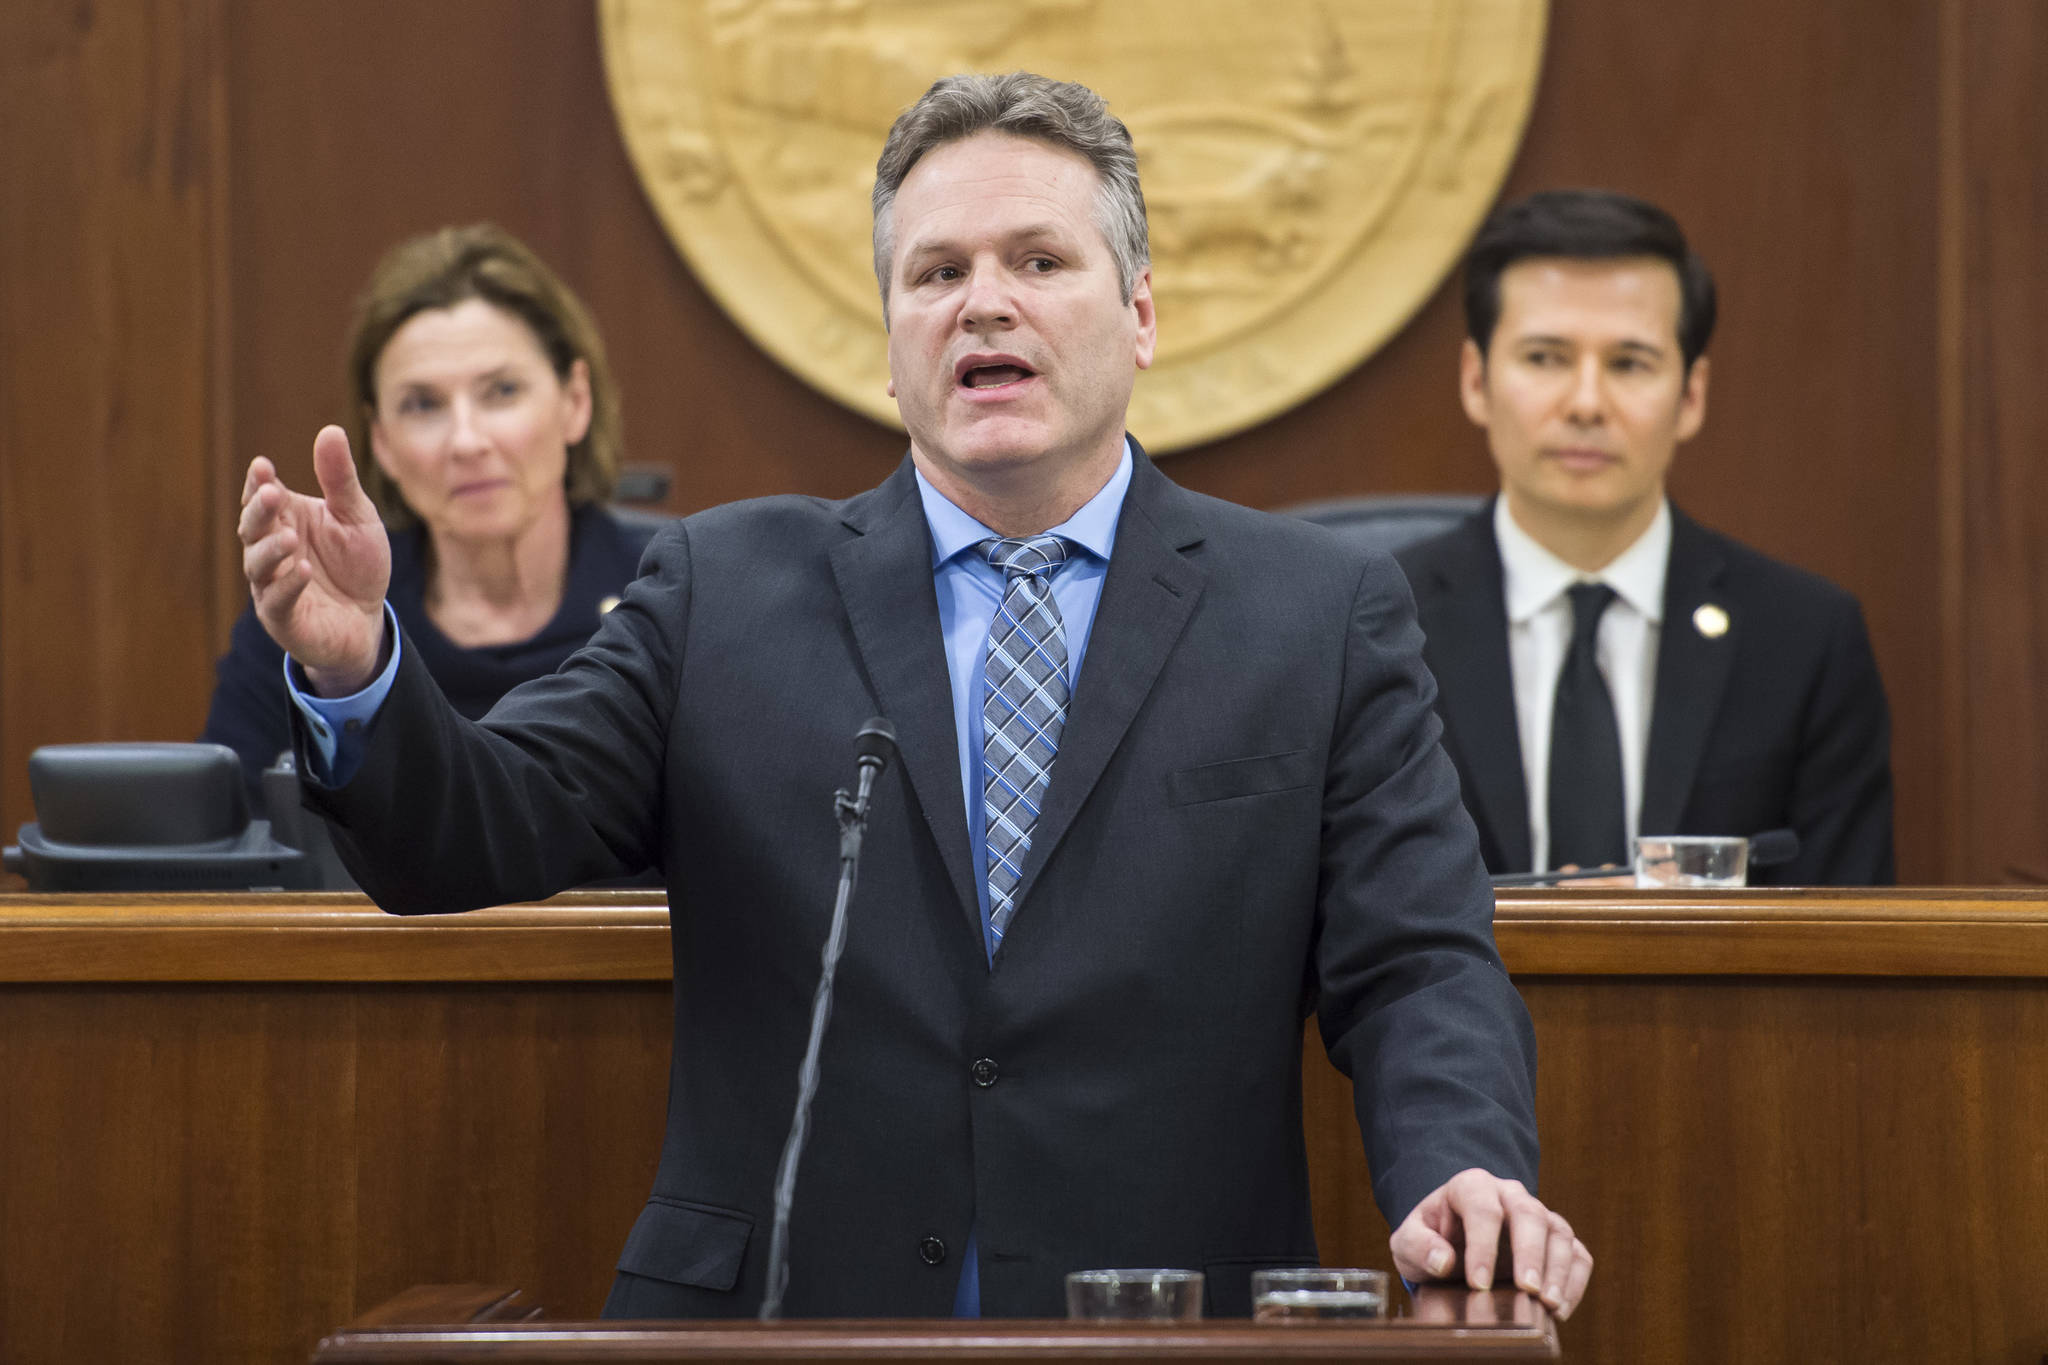 Gov. Mike Dunleavy give his State of the State speech to a Joint Session of the Alaska Legislature as Senate President Cathy Giessel, R-Anchorage, left, and House Speaker Pro Tempore Rep. Neal Foster, D-Nome, listen at the Capitol on Tuesday, Jan. 22. (Michael Penn/Juneau Empire)